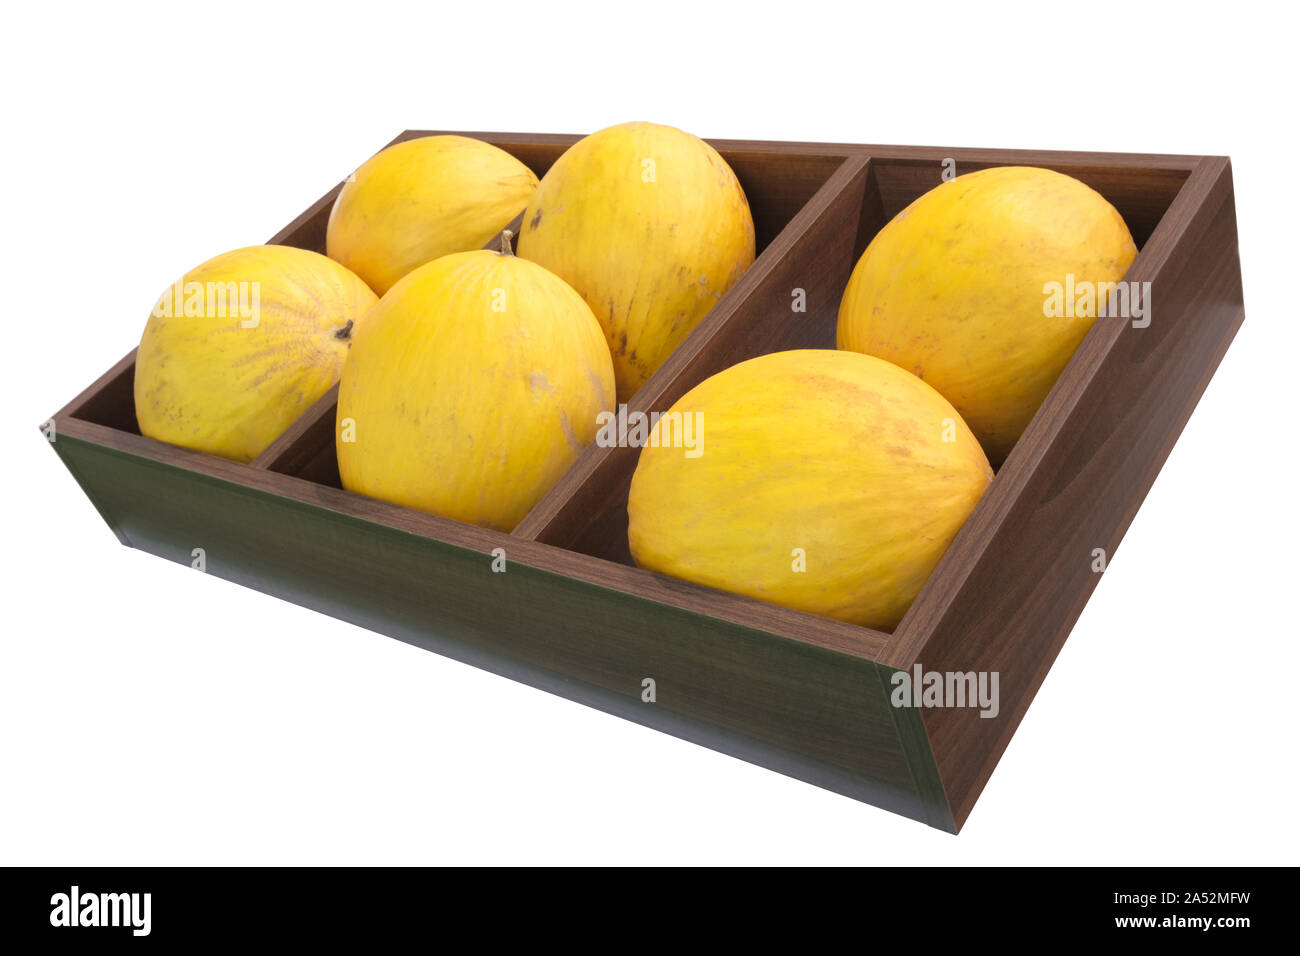 Yellow melons in wooden boxes,  Melons fruit close up, street market, on white Stock Photo